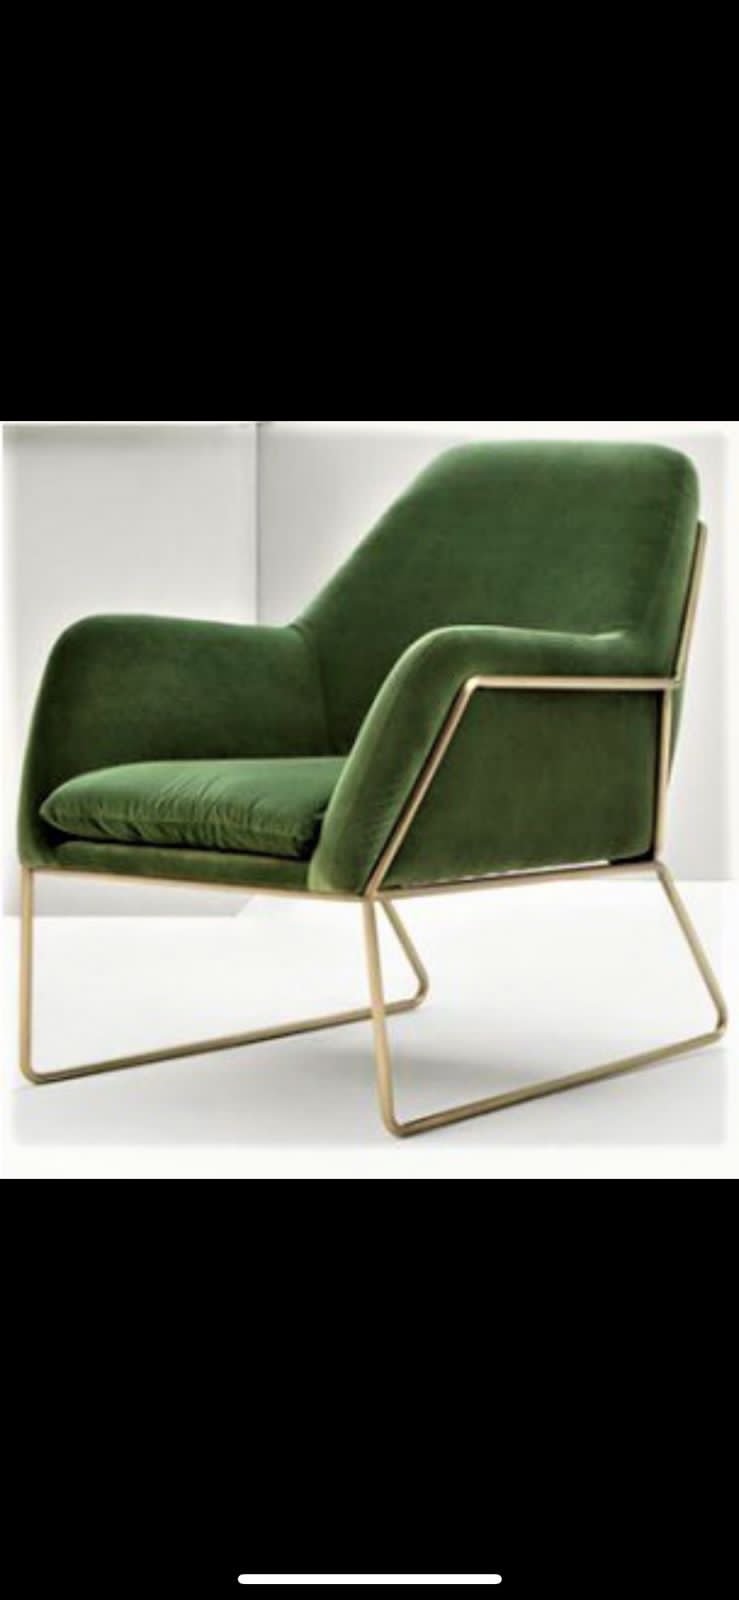 PC Home Decor | Metal Venice Sofa Chair, Green and Gold